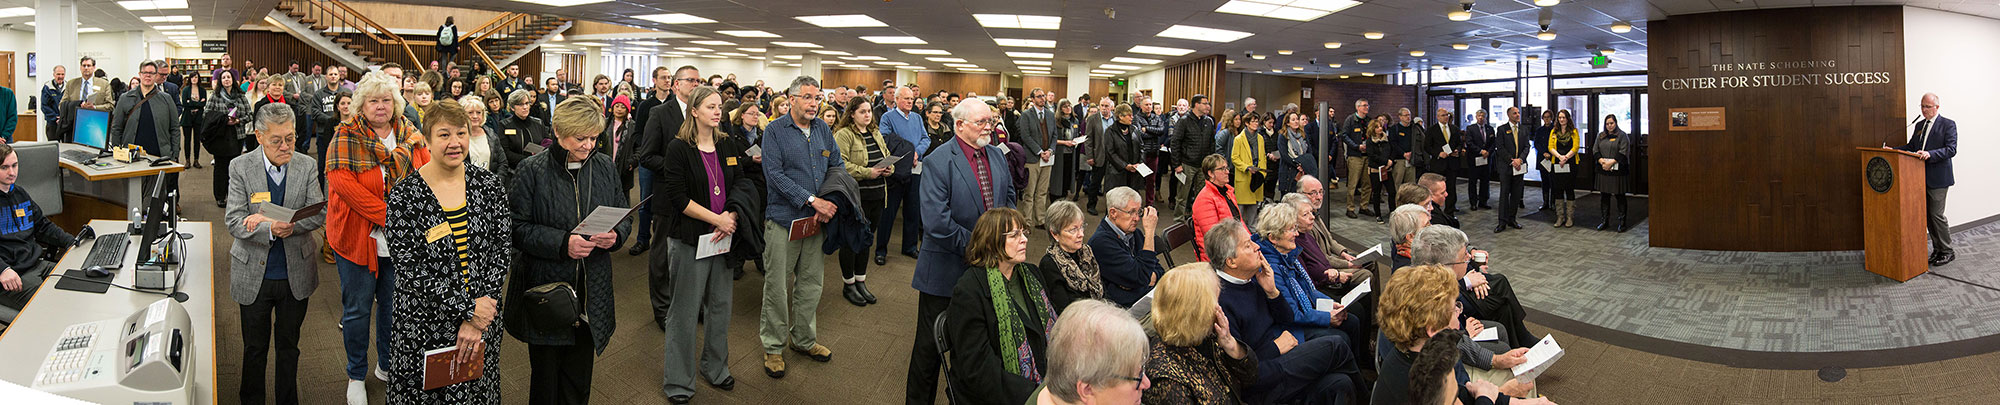 Dedication of the Nate Shoening Student Success Center in the Mortvit Library at PLU, Feb. 8, 2019.